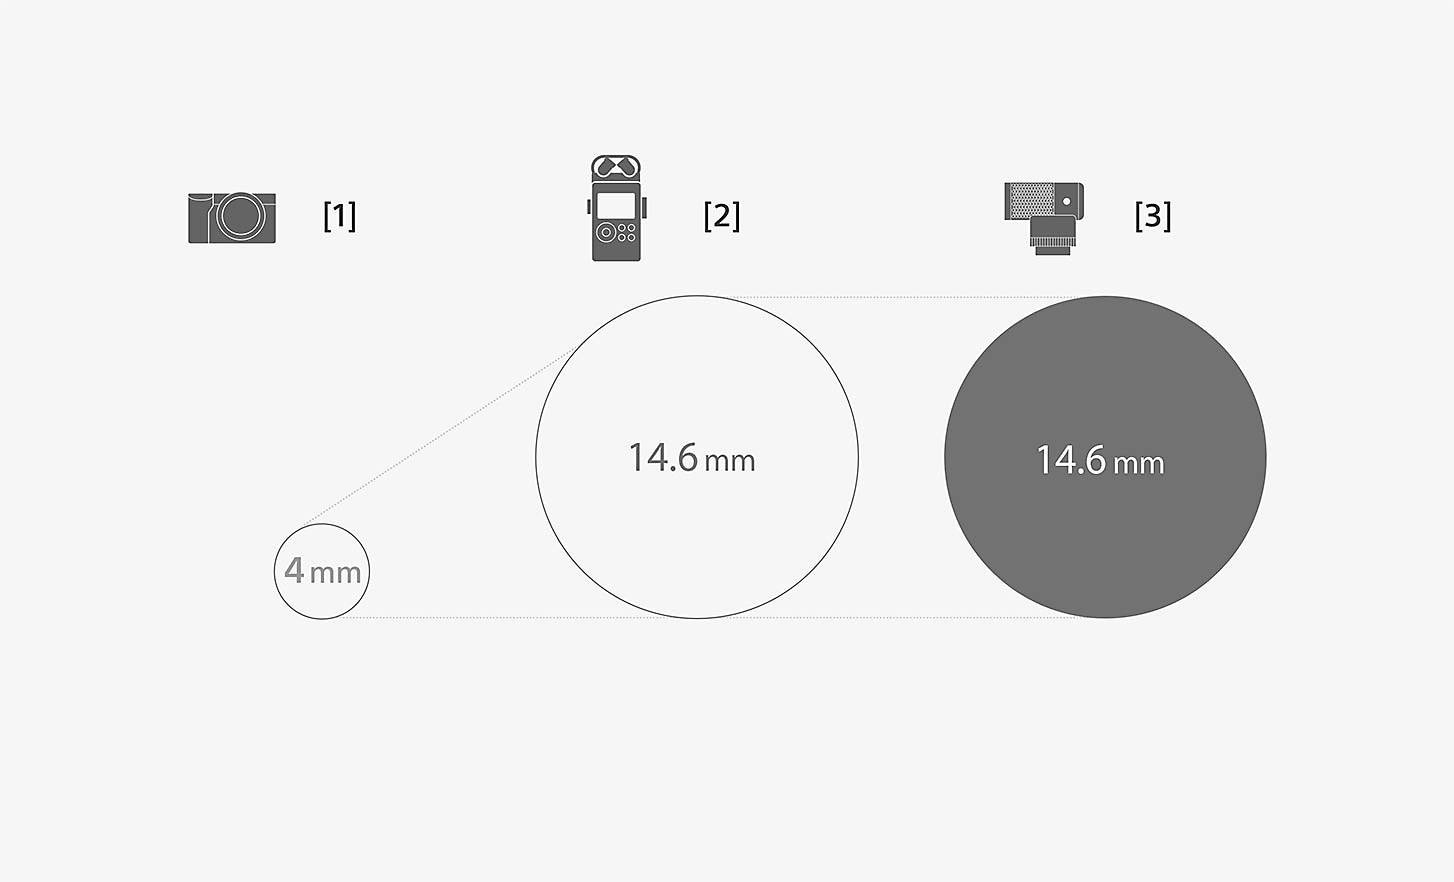 Illustration comparing the dimensions of the ECM-G1 microphone capsule and a standard built-in microphone